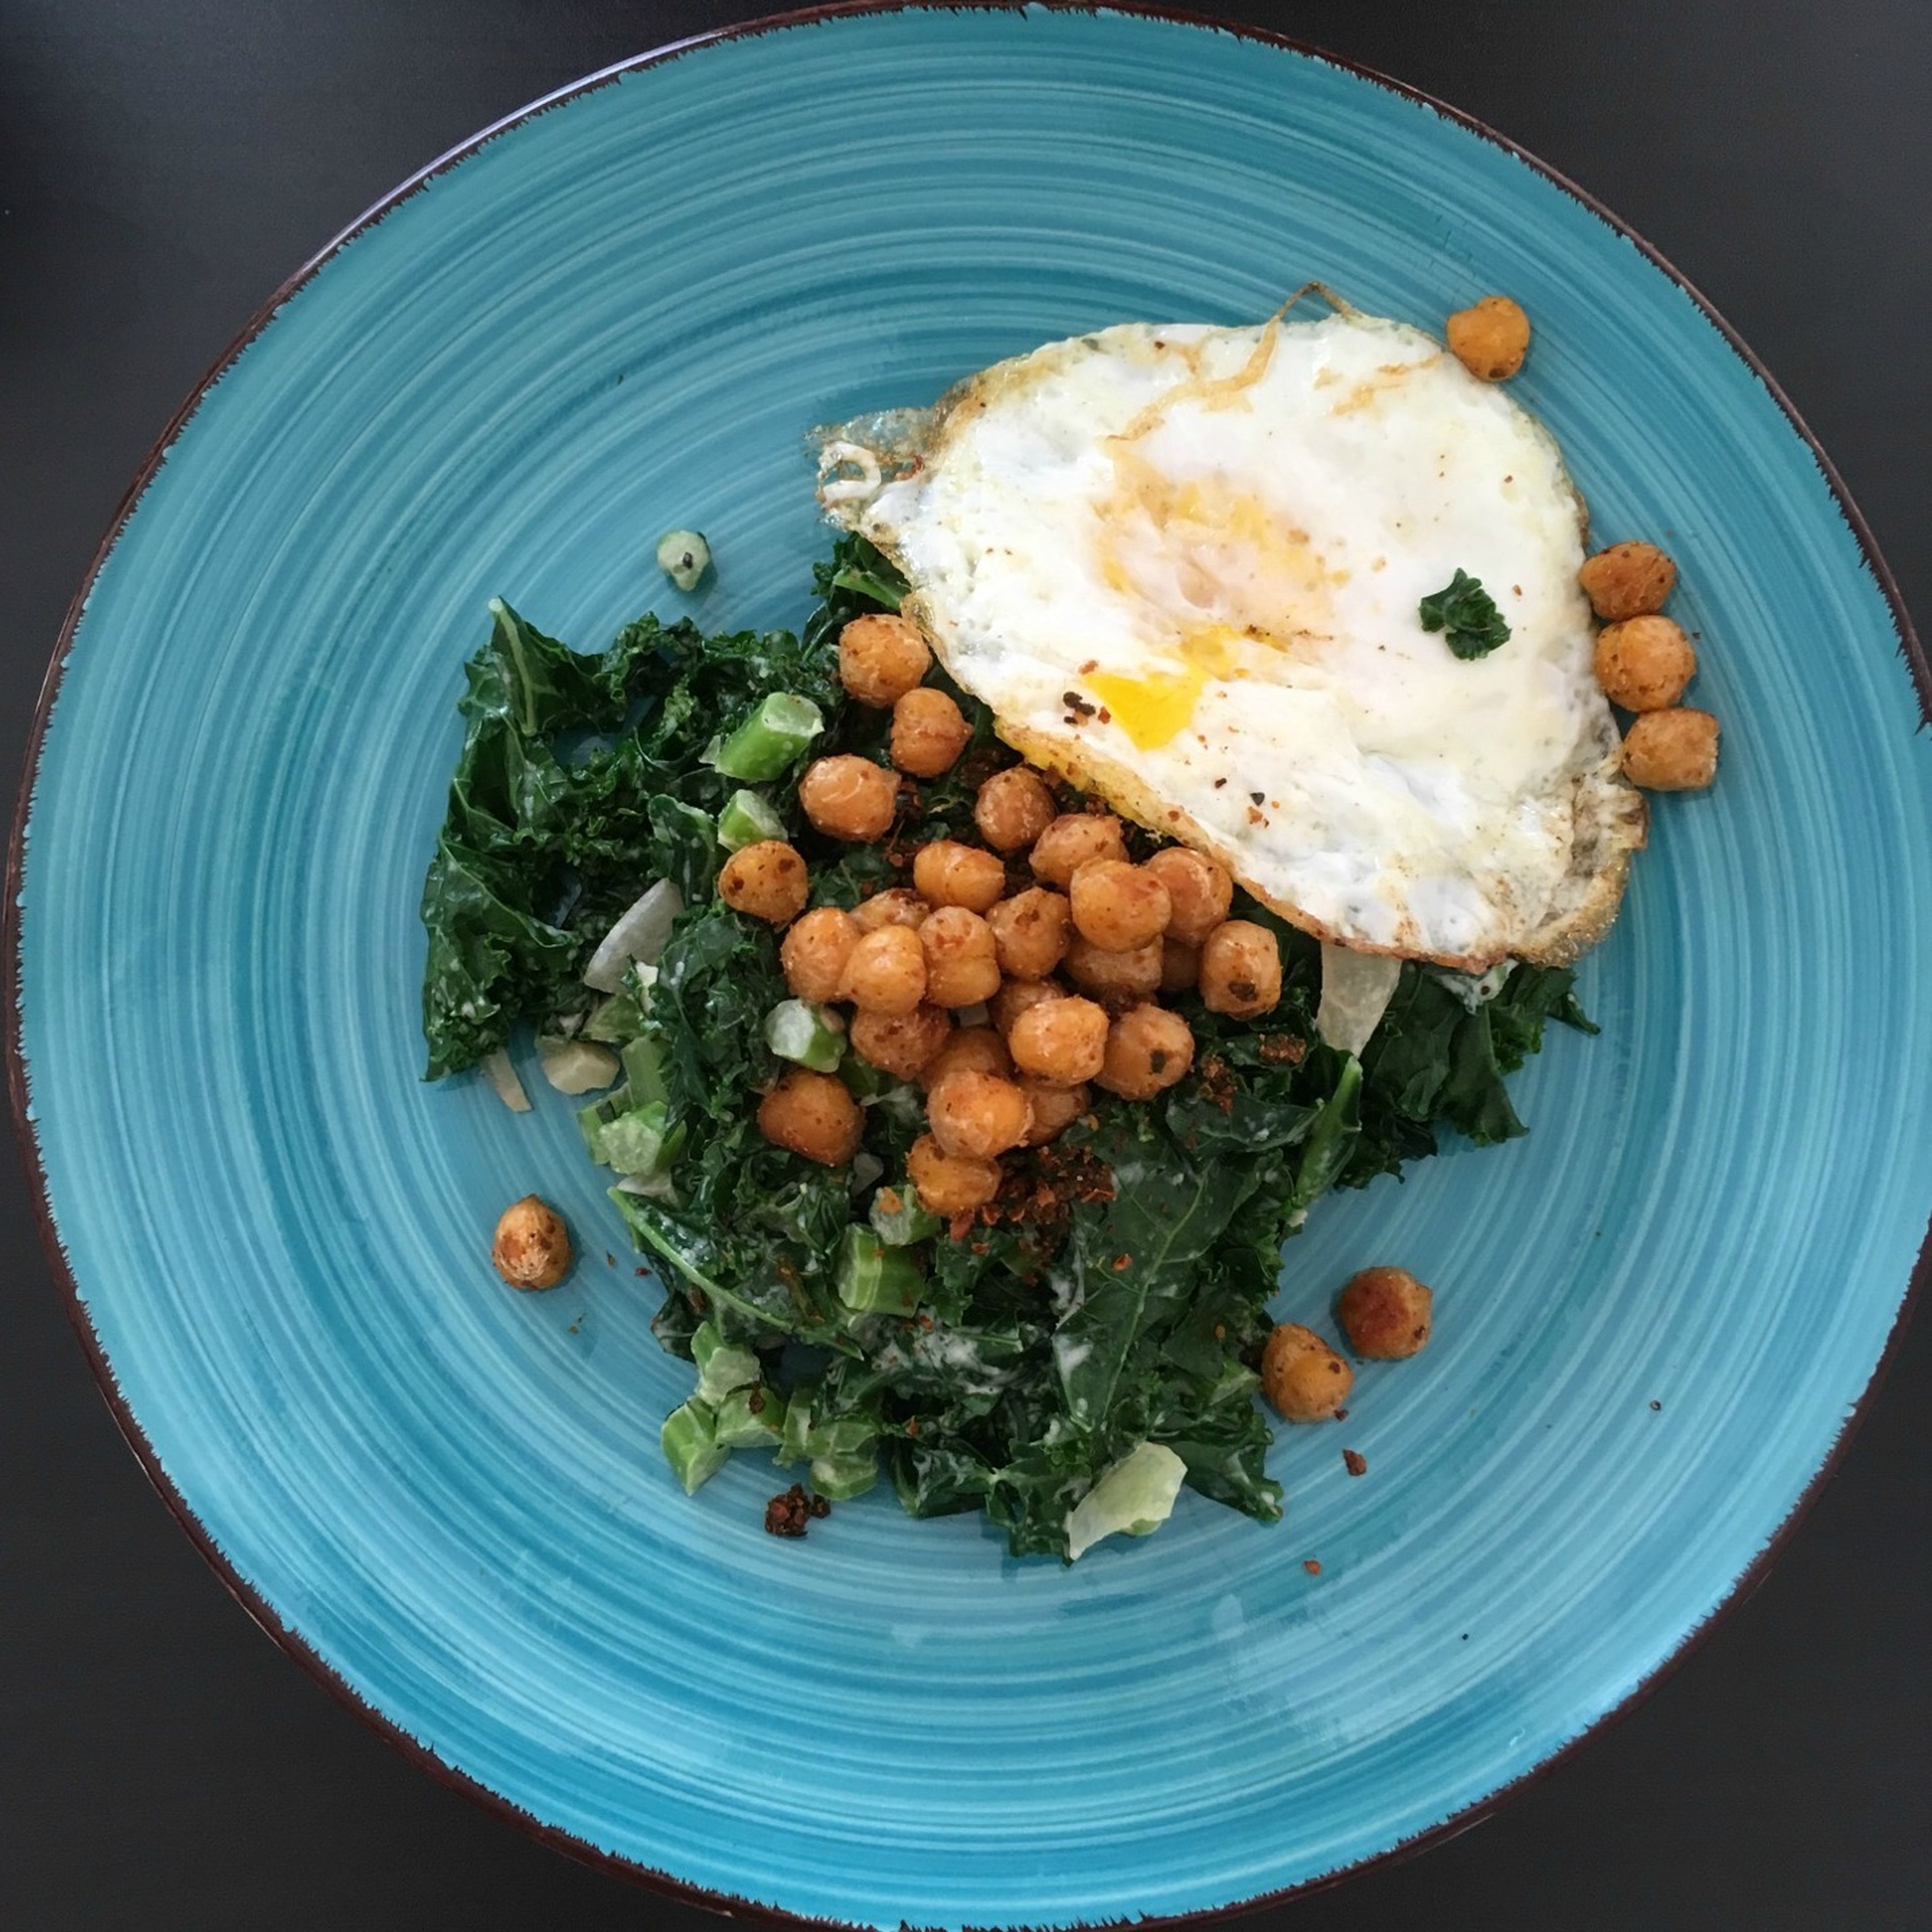 Kale salad with spicy chickpeas